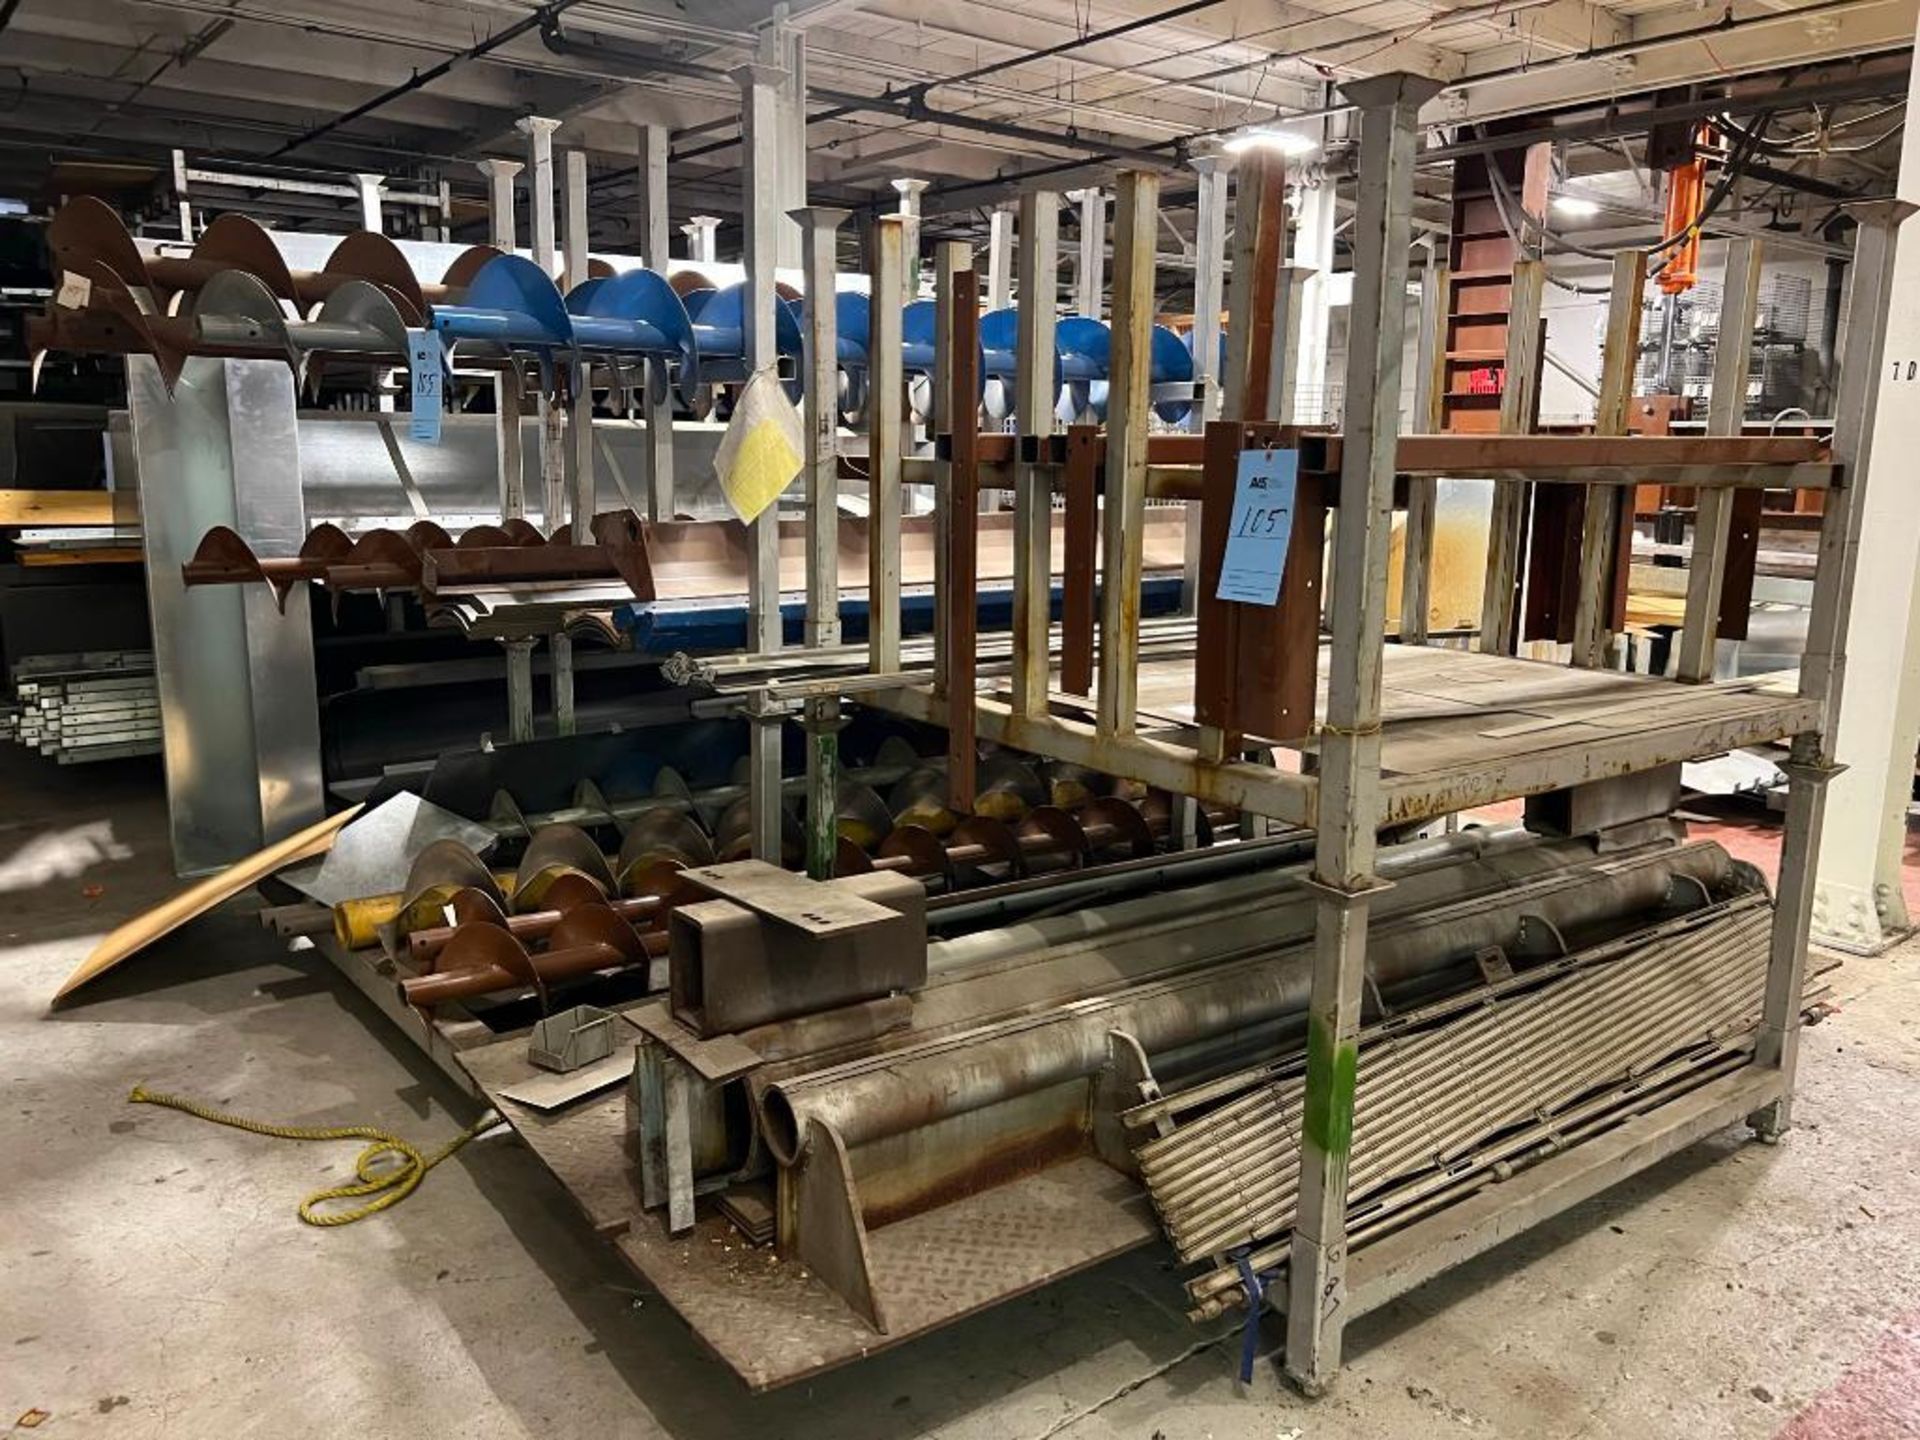 Lot: Stackable Racks with Assorted Dryer Augers & Enclosures